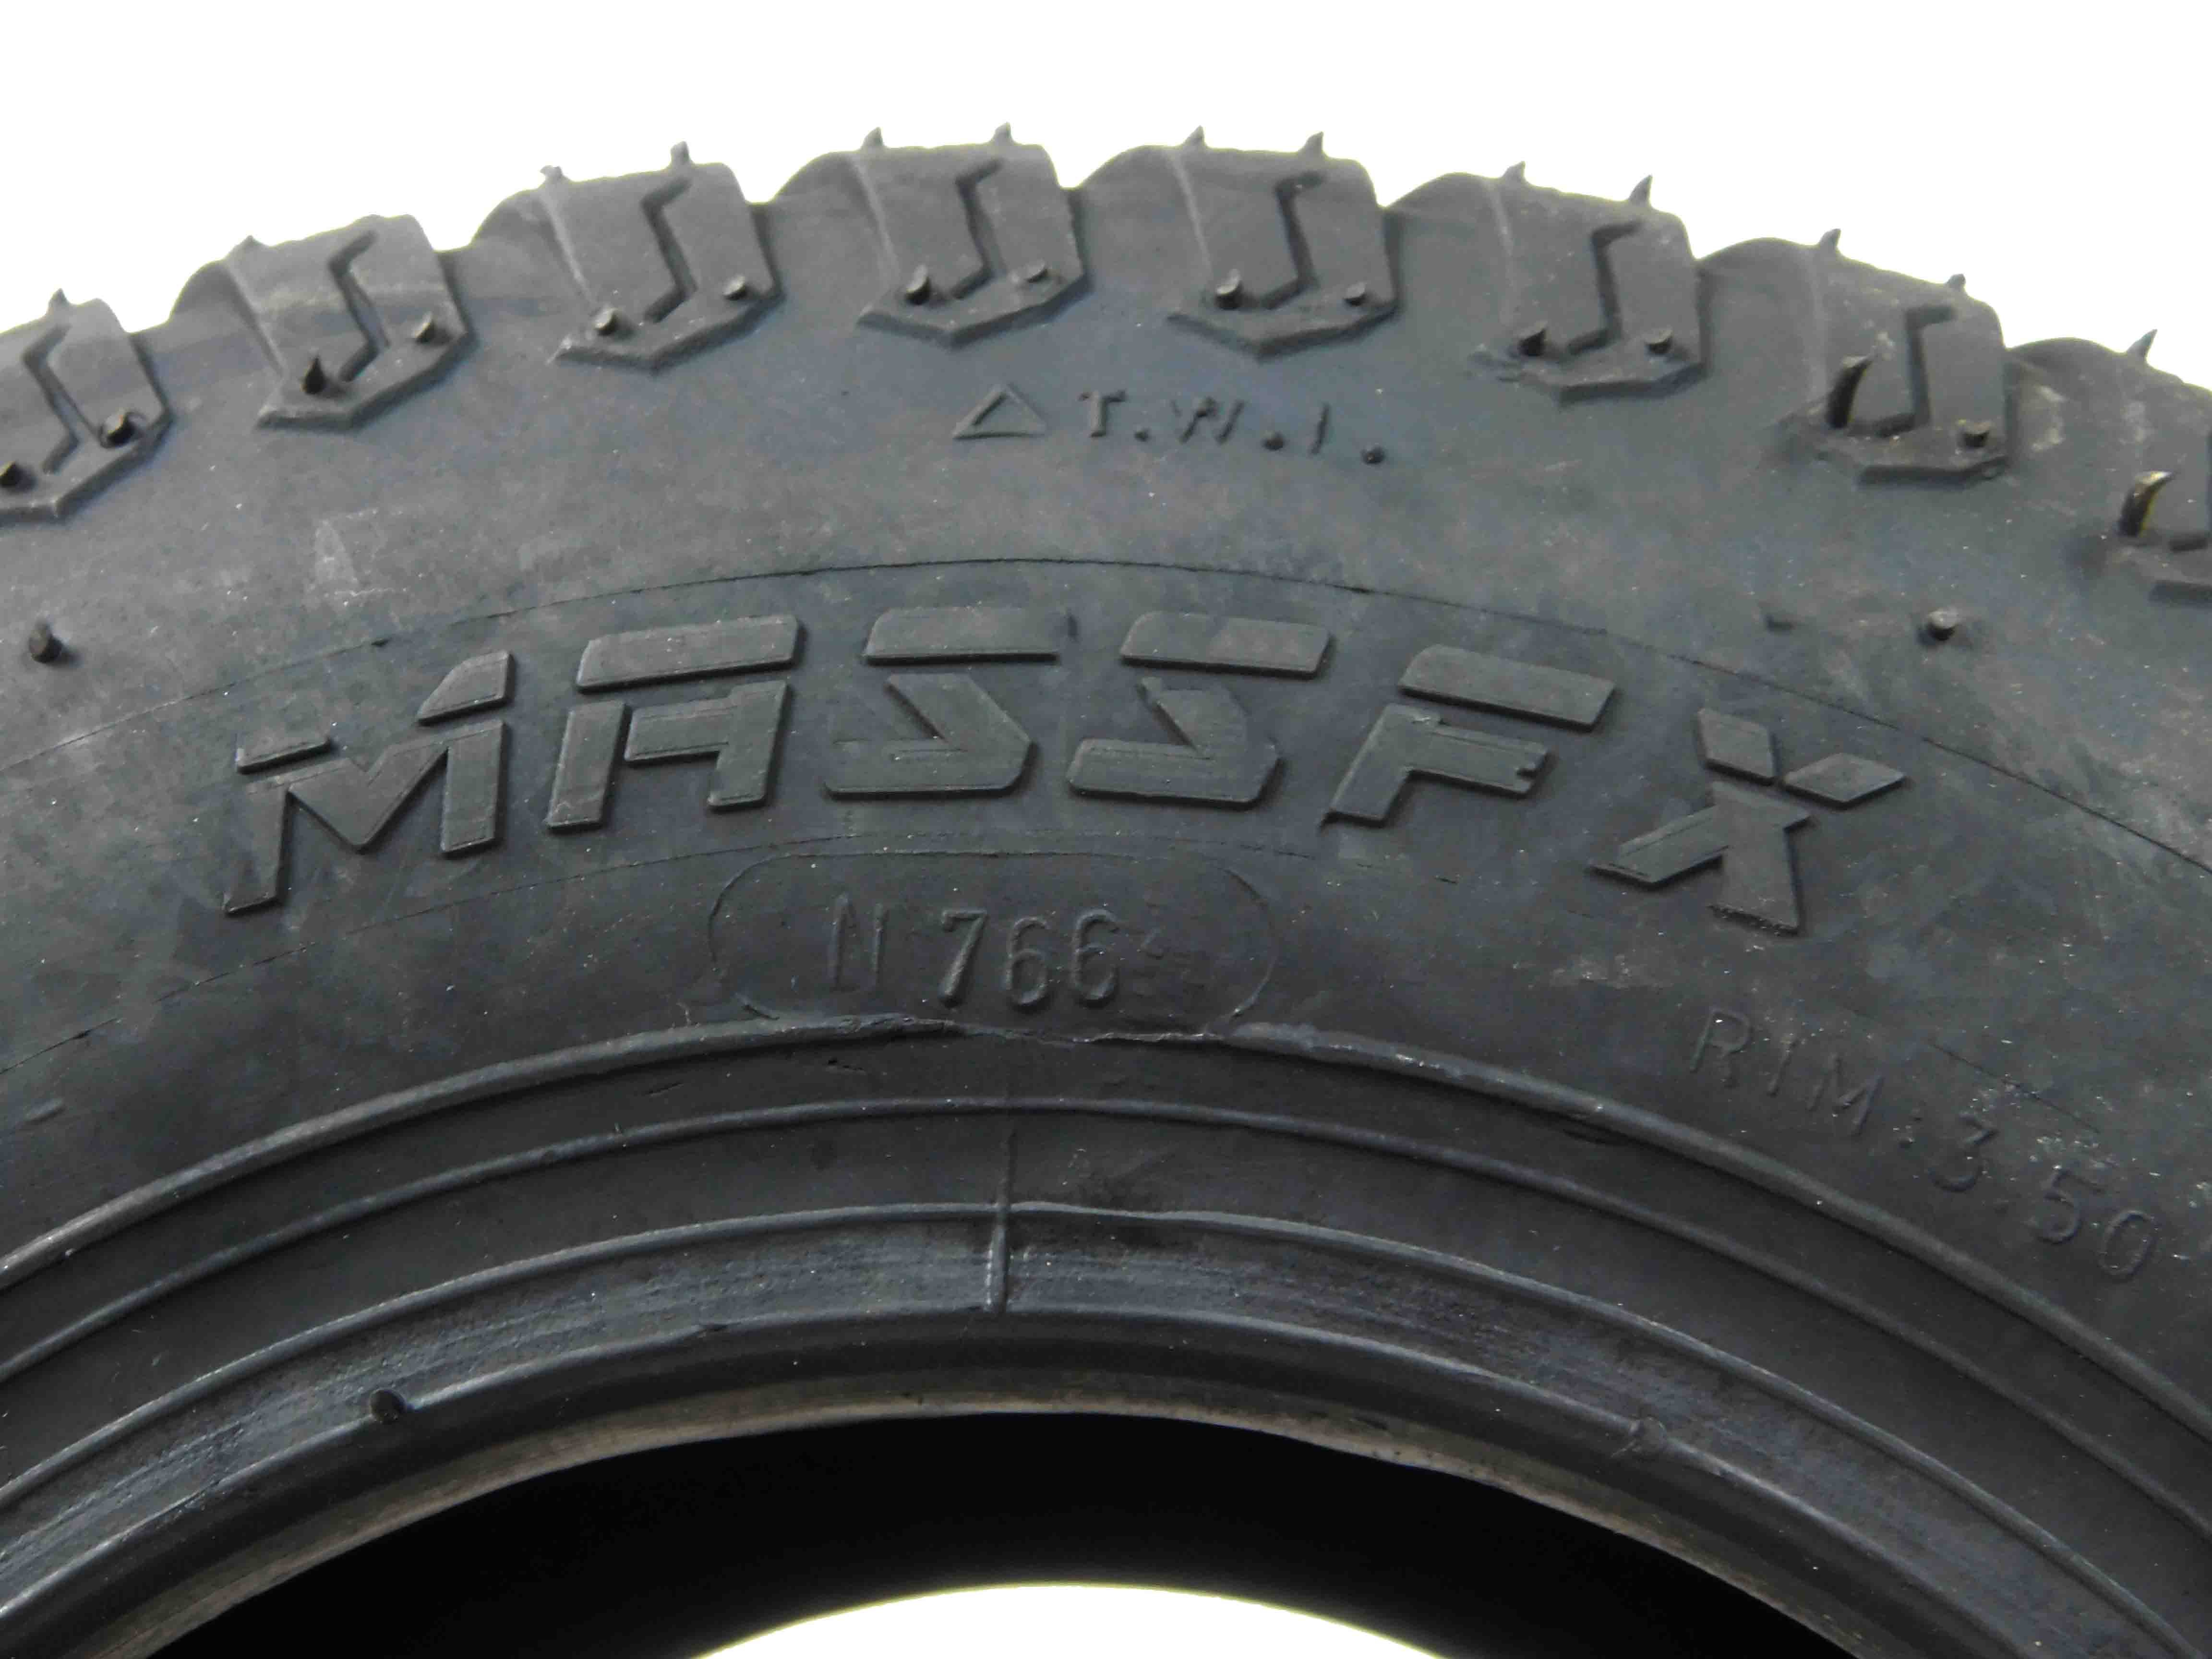 MASSFX 13x5-6 Lawn Mower Tires 4ply